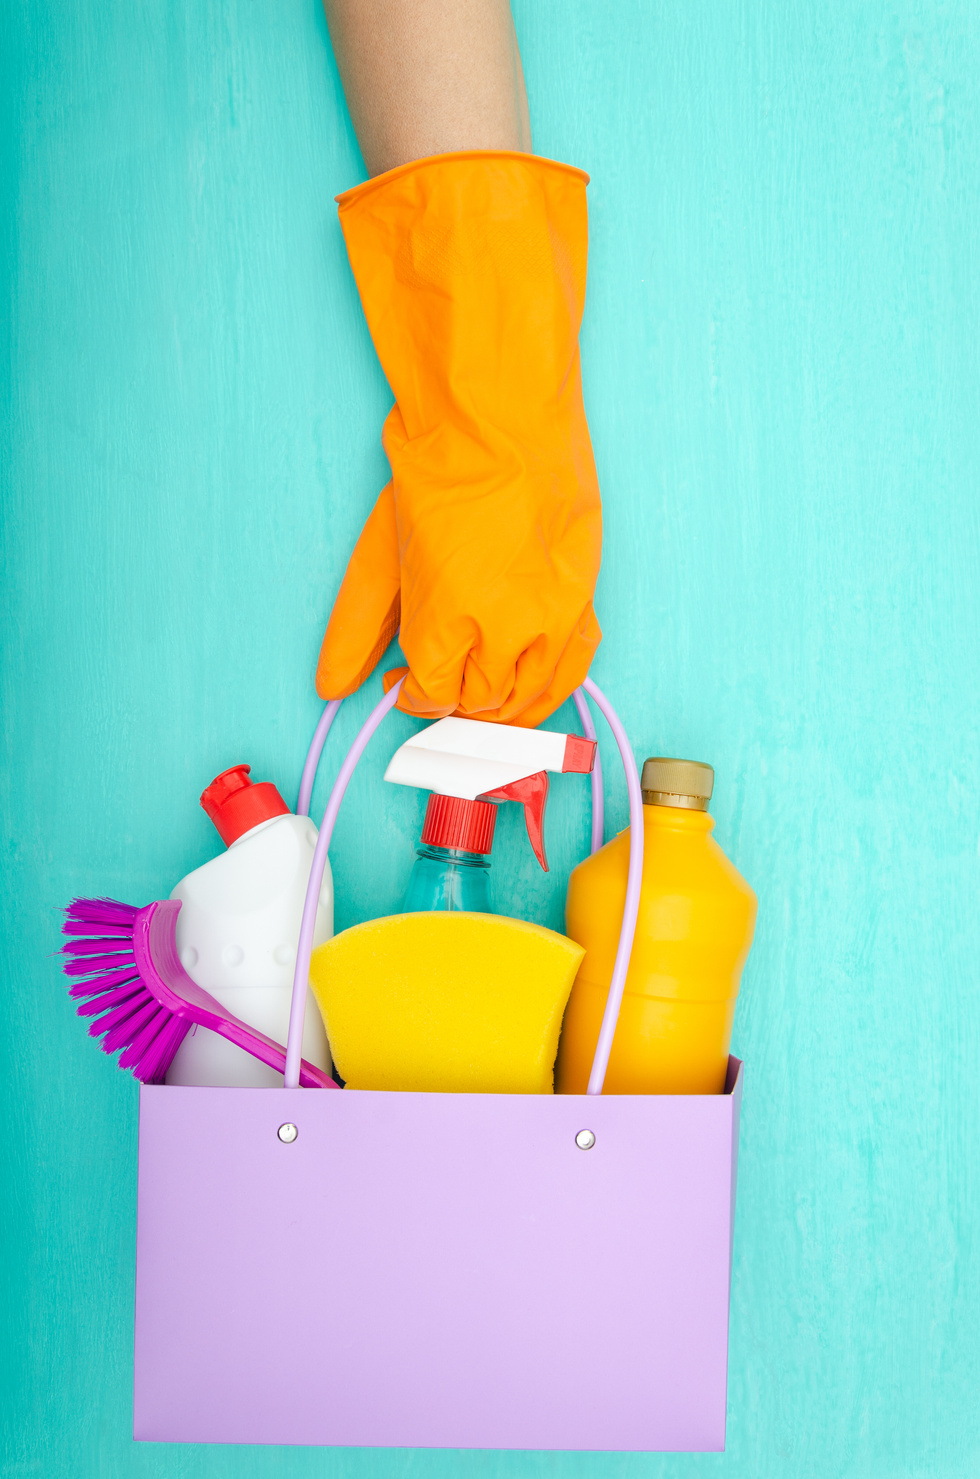 Cleaning supplies for home cleaning